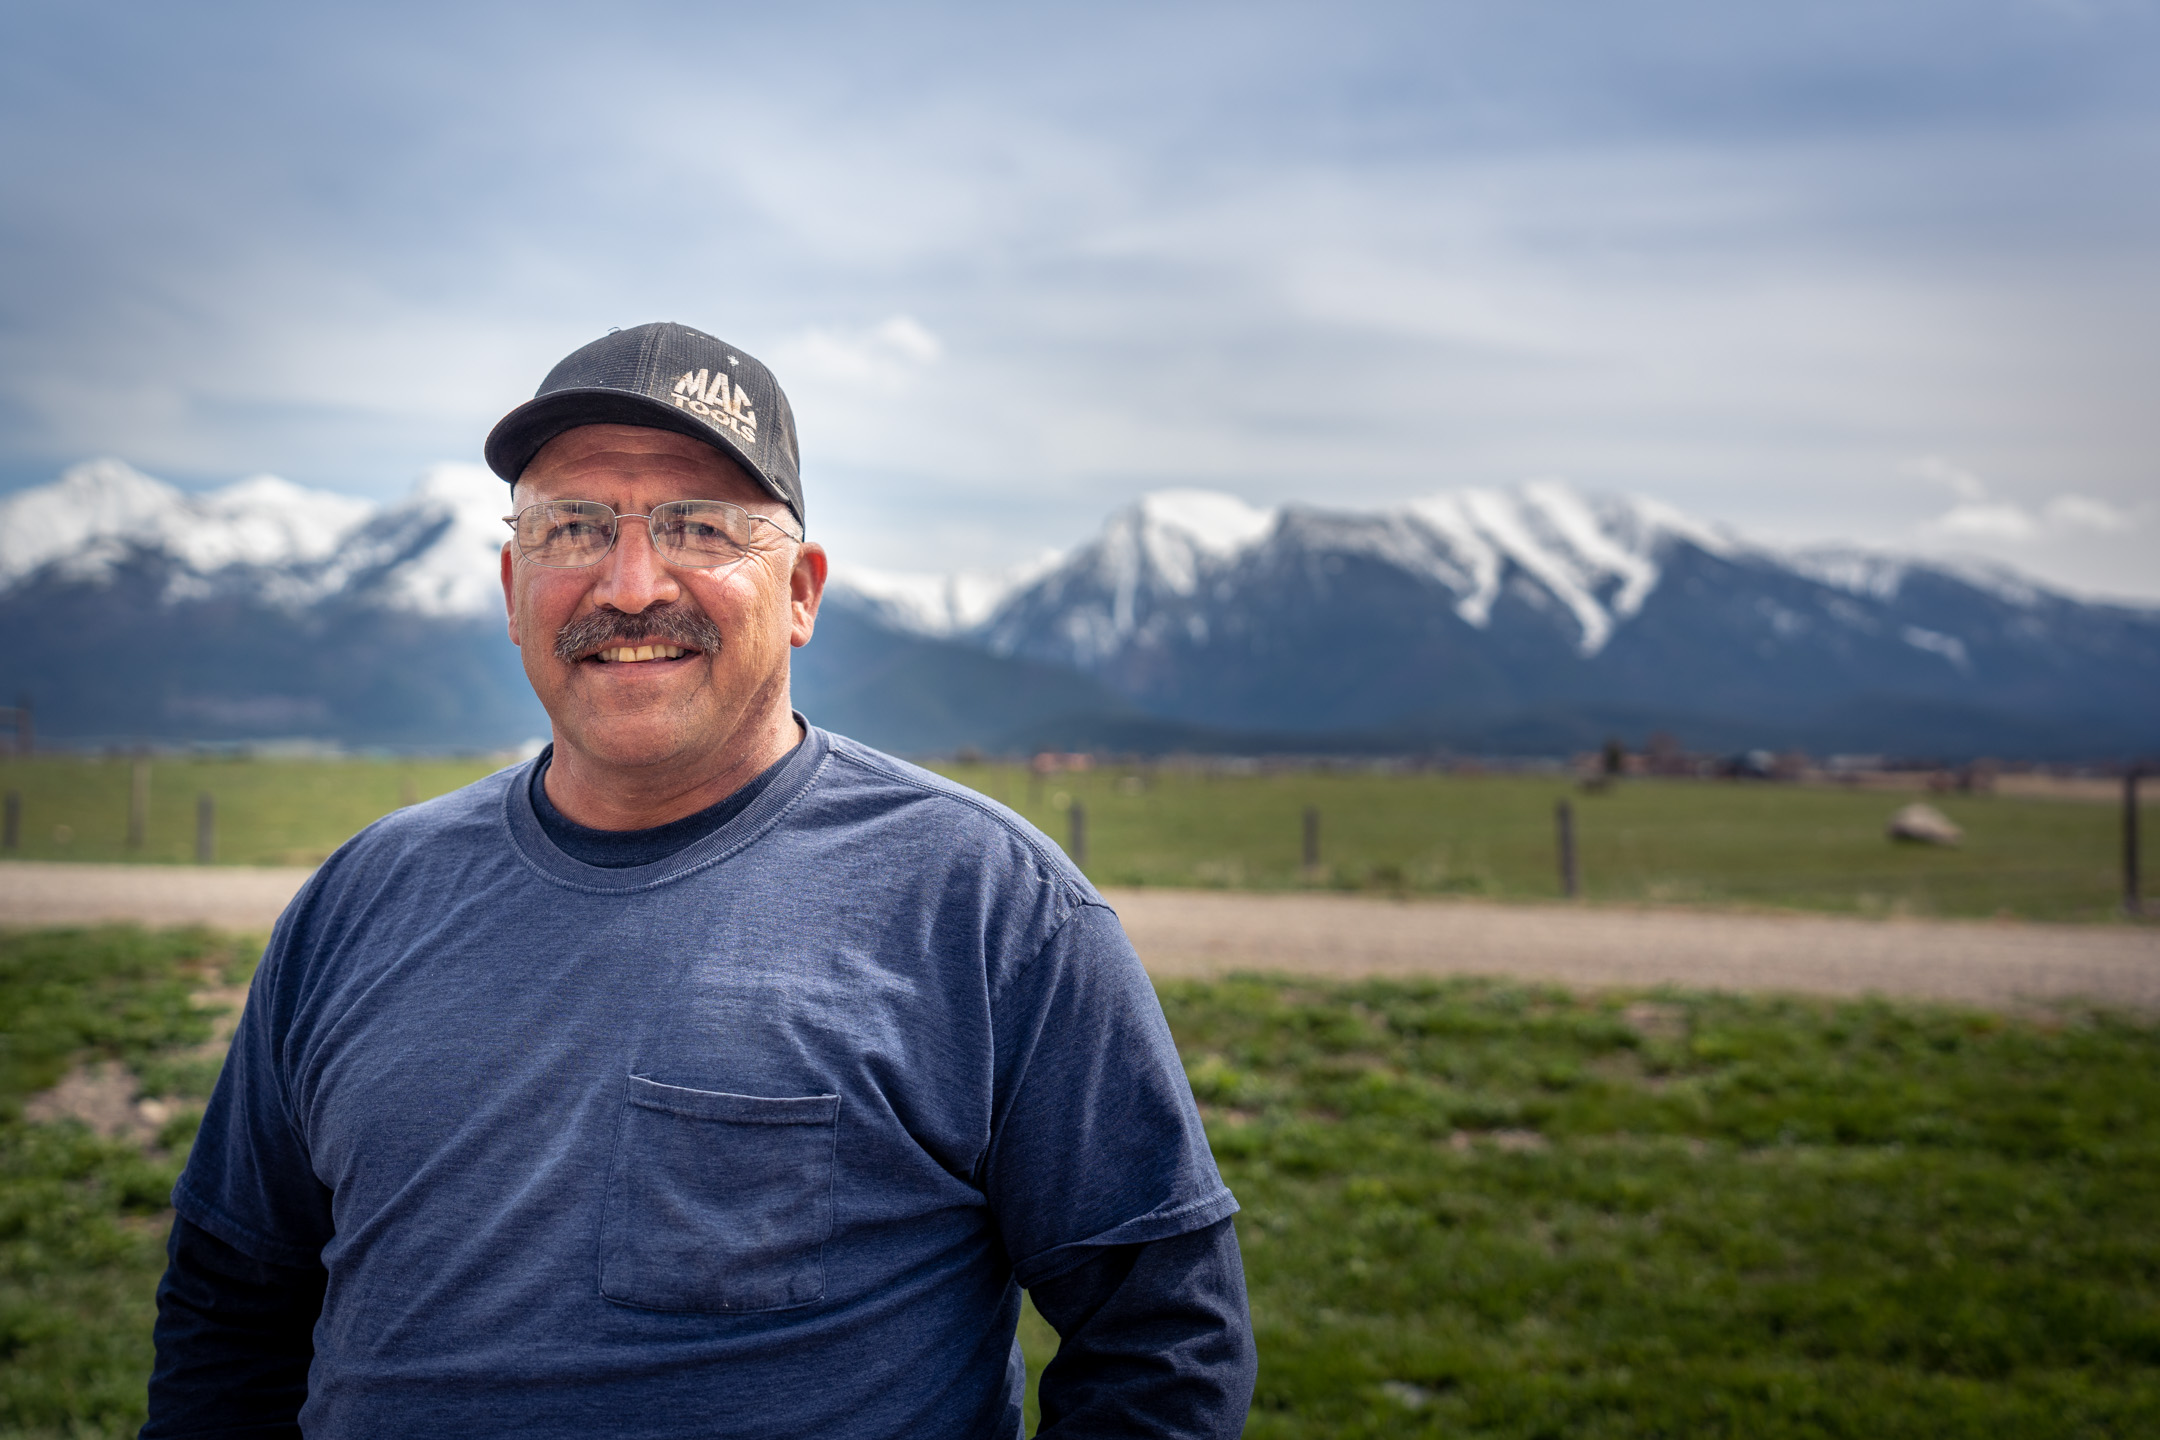 A man wearing a blue shirt and hat smiles for the camera, with mountains and green grass in the background.